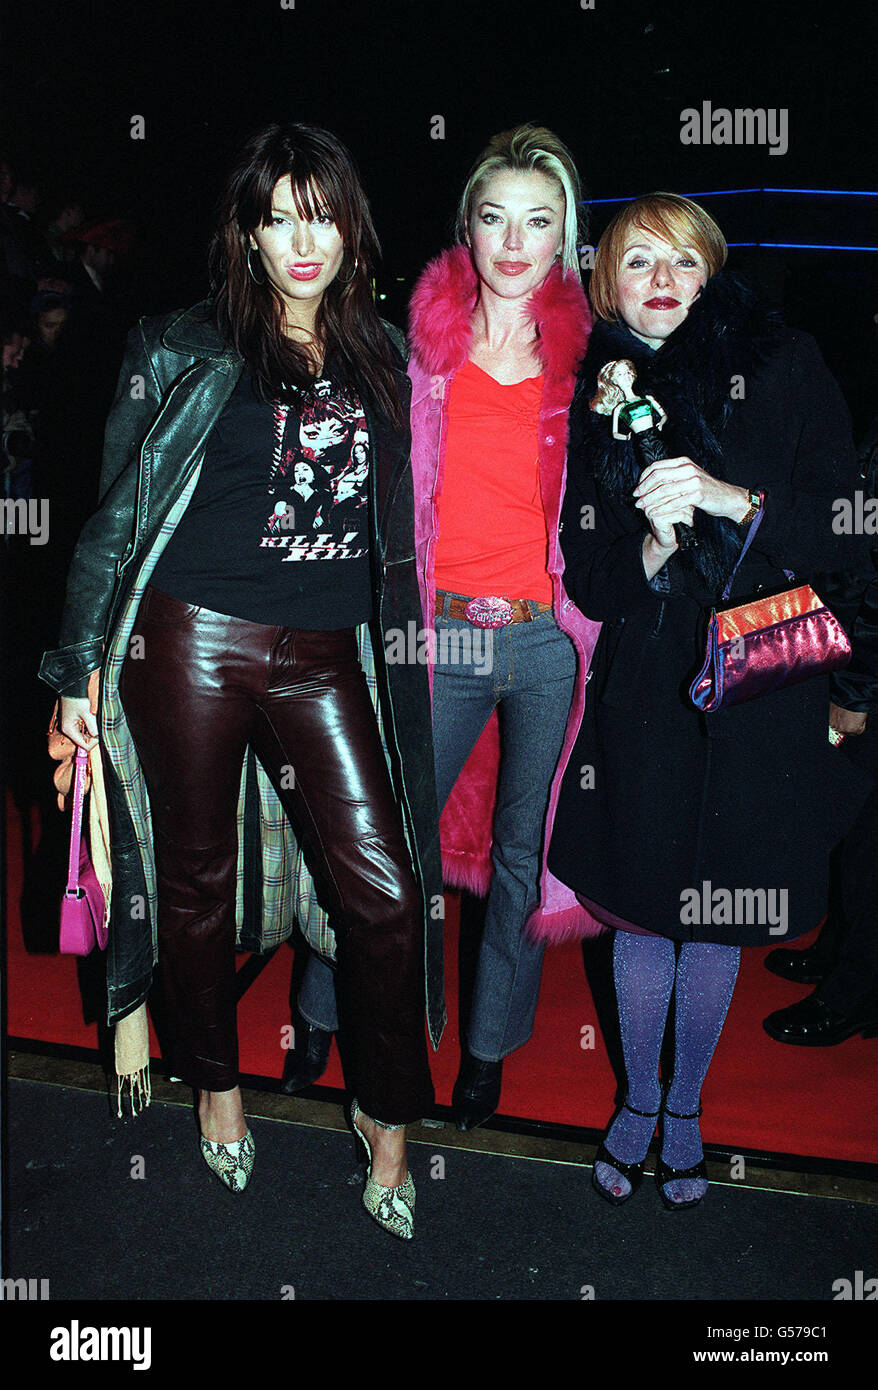 (L-R) Model Catalina Guirado, Socialite Tamara Beckwith and daughter of actress Joan Collins, Tara Newley, at Planet Hollywood where Britney Spears hosted her Farewell European Tour Party for celebrity friends and supporters. Stock Photo